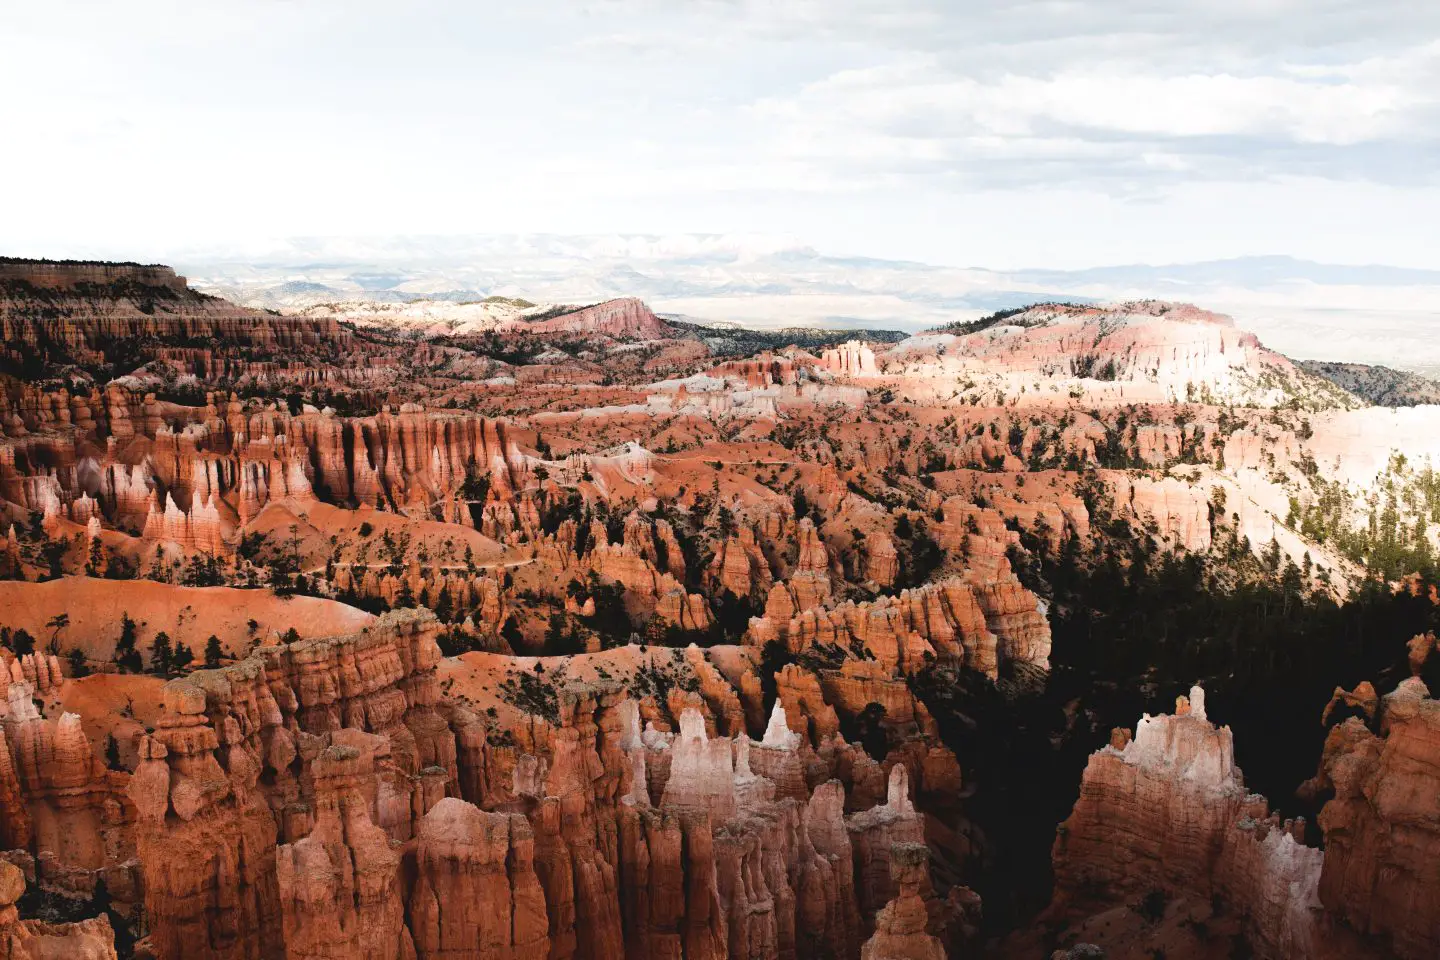 Camping in Bryce Canyon National Park is one of the best ways to explore this underrated park amongst Utah’s Mighty Five. Pack up your camping gear and discover the best campsites inside Bryce Canyon, outside the park, and free alternatives if you’re on a budget! #utah #brycecanyon #camping